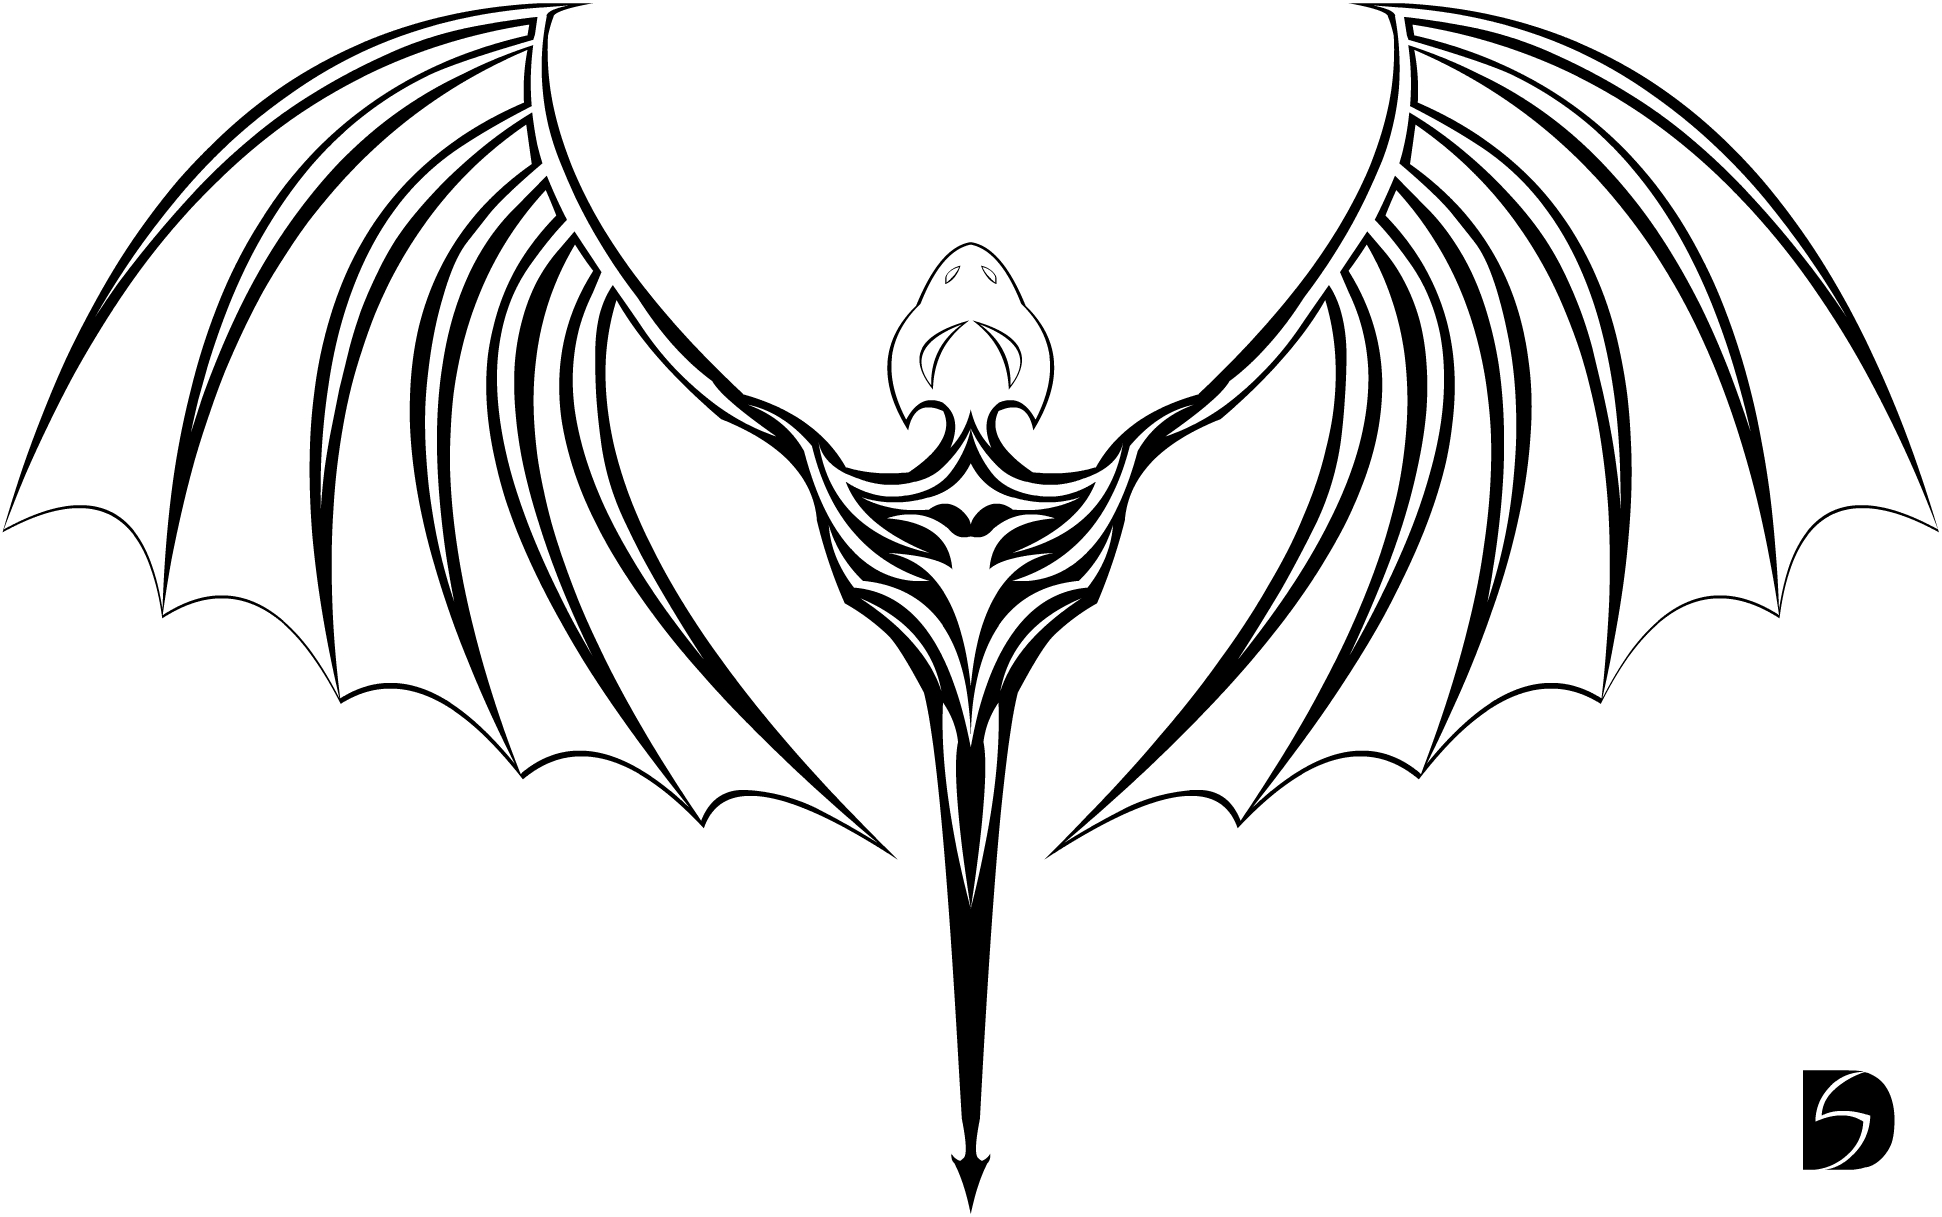 deviantART: More Like Dragon Wing Tattoo by